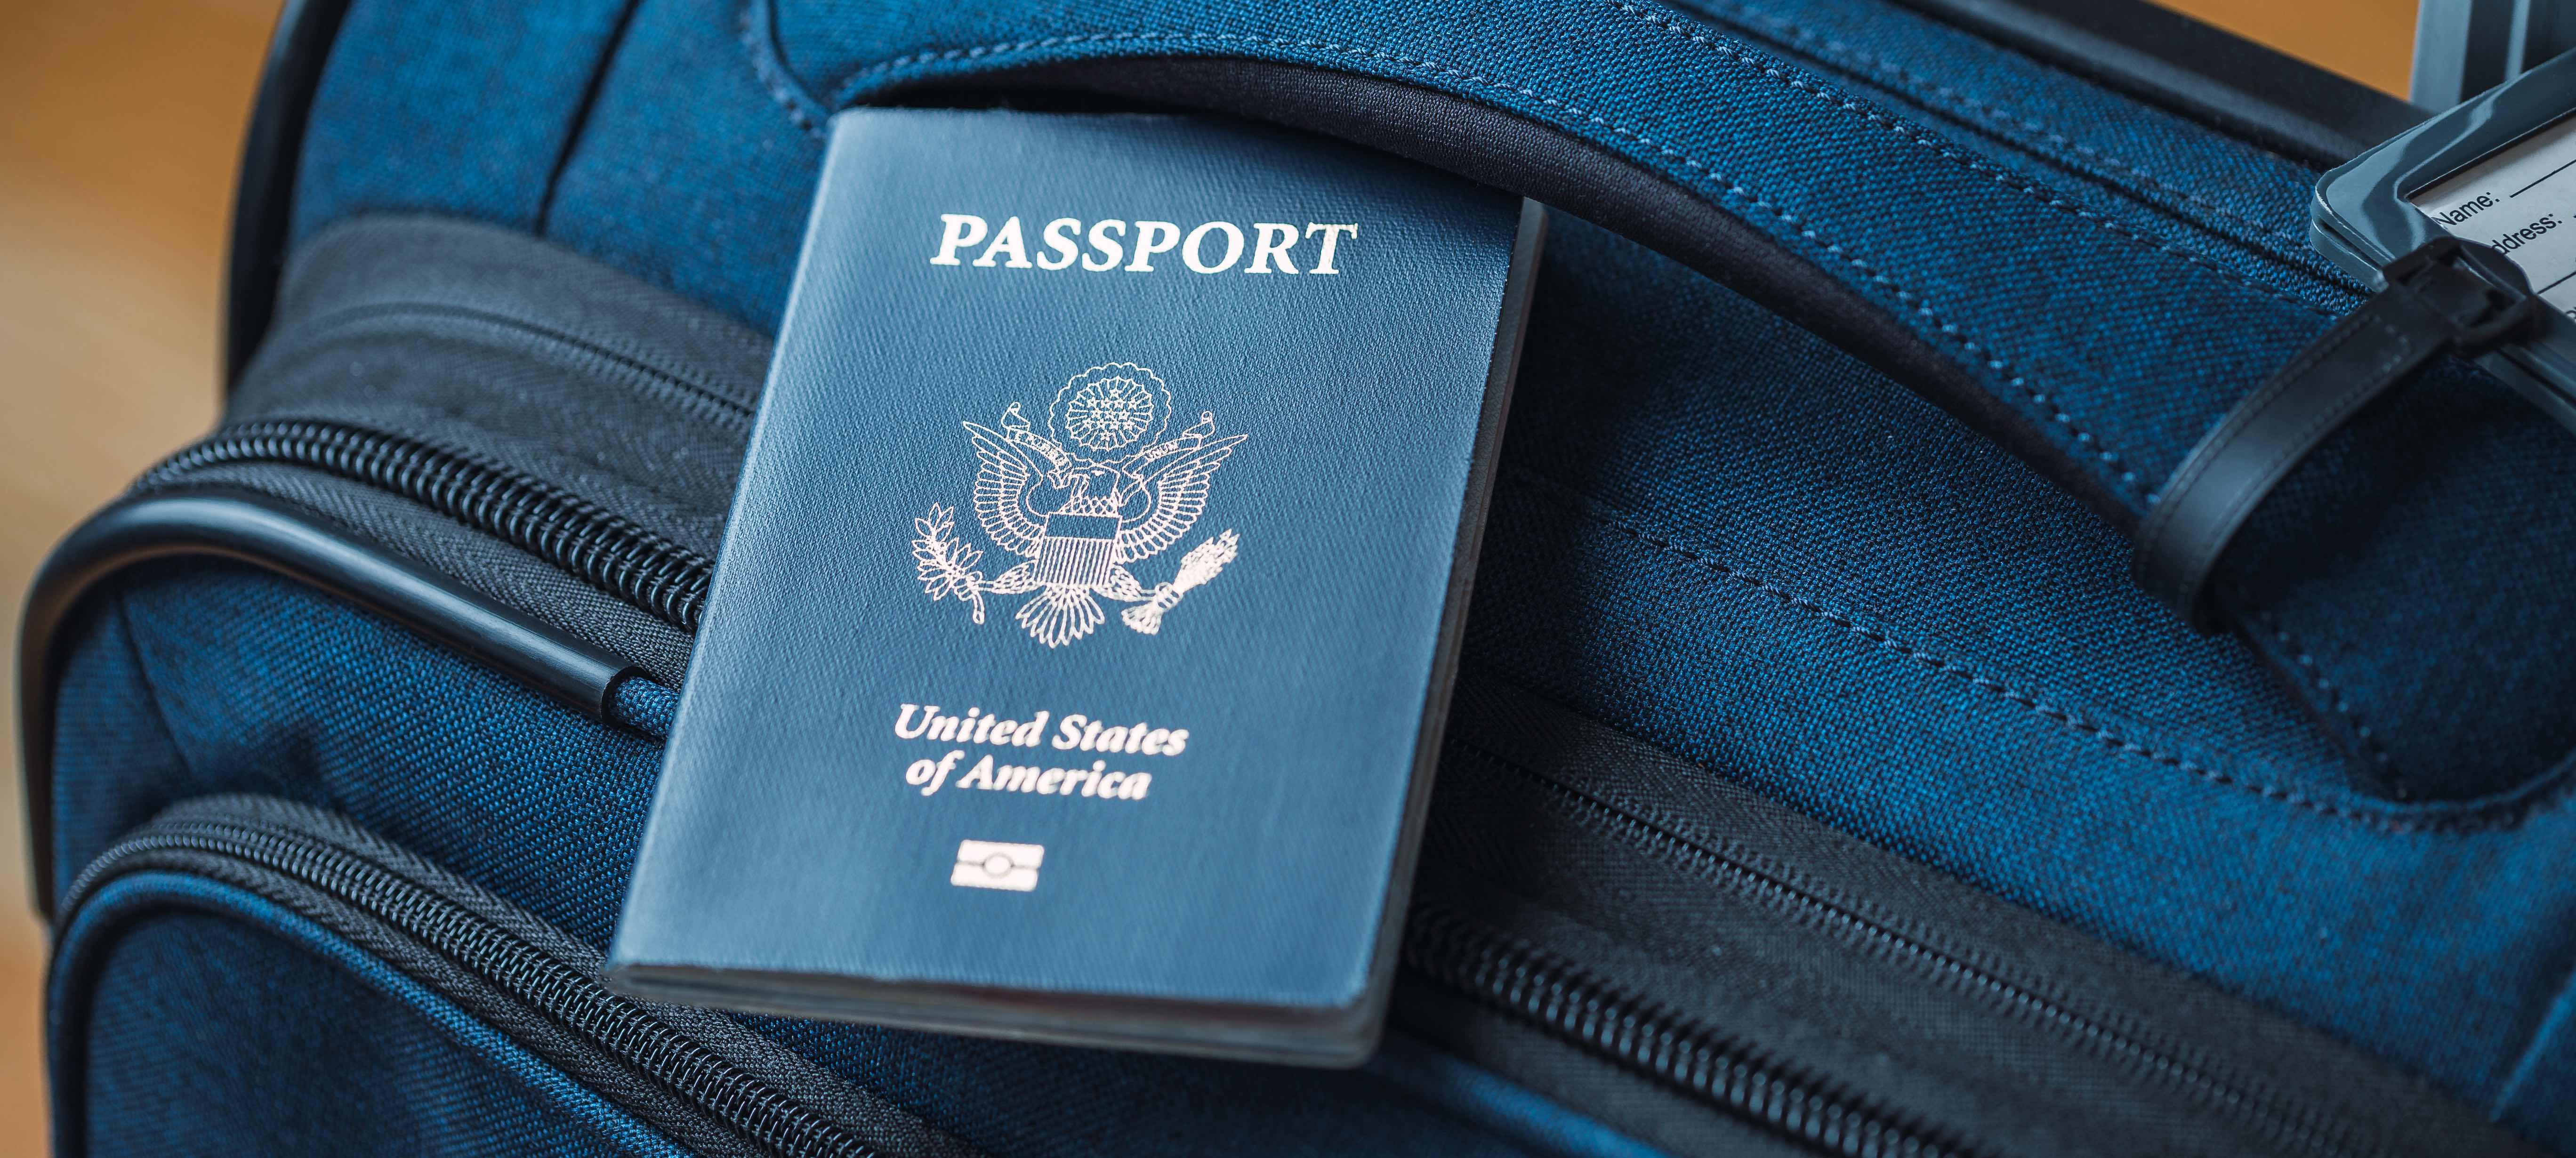 A blue American passport sitting on top of a blue suitcase